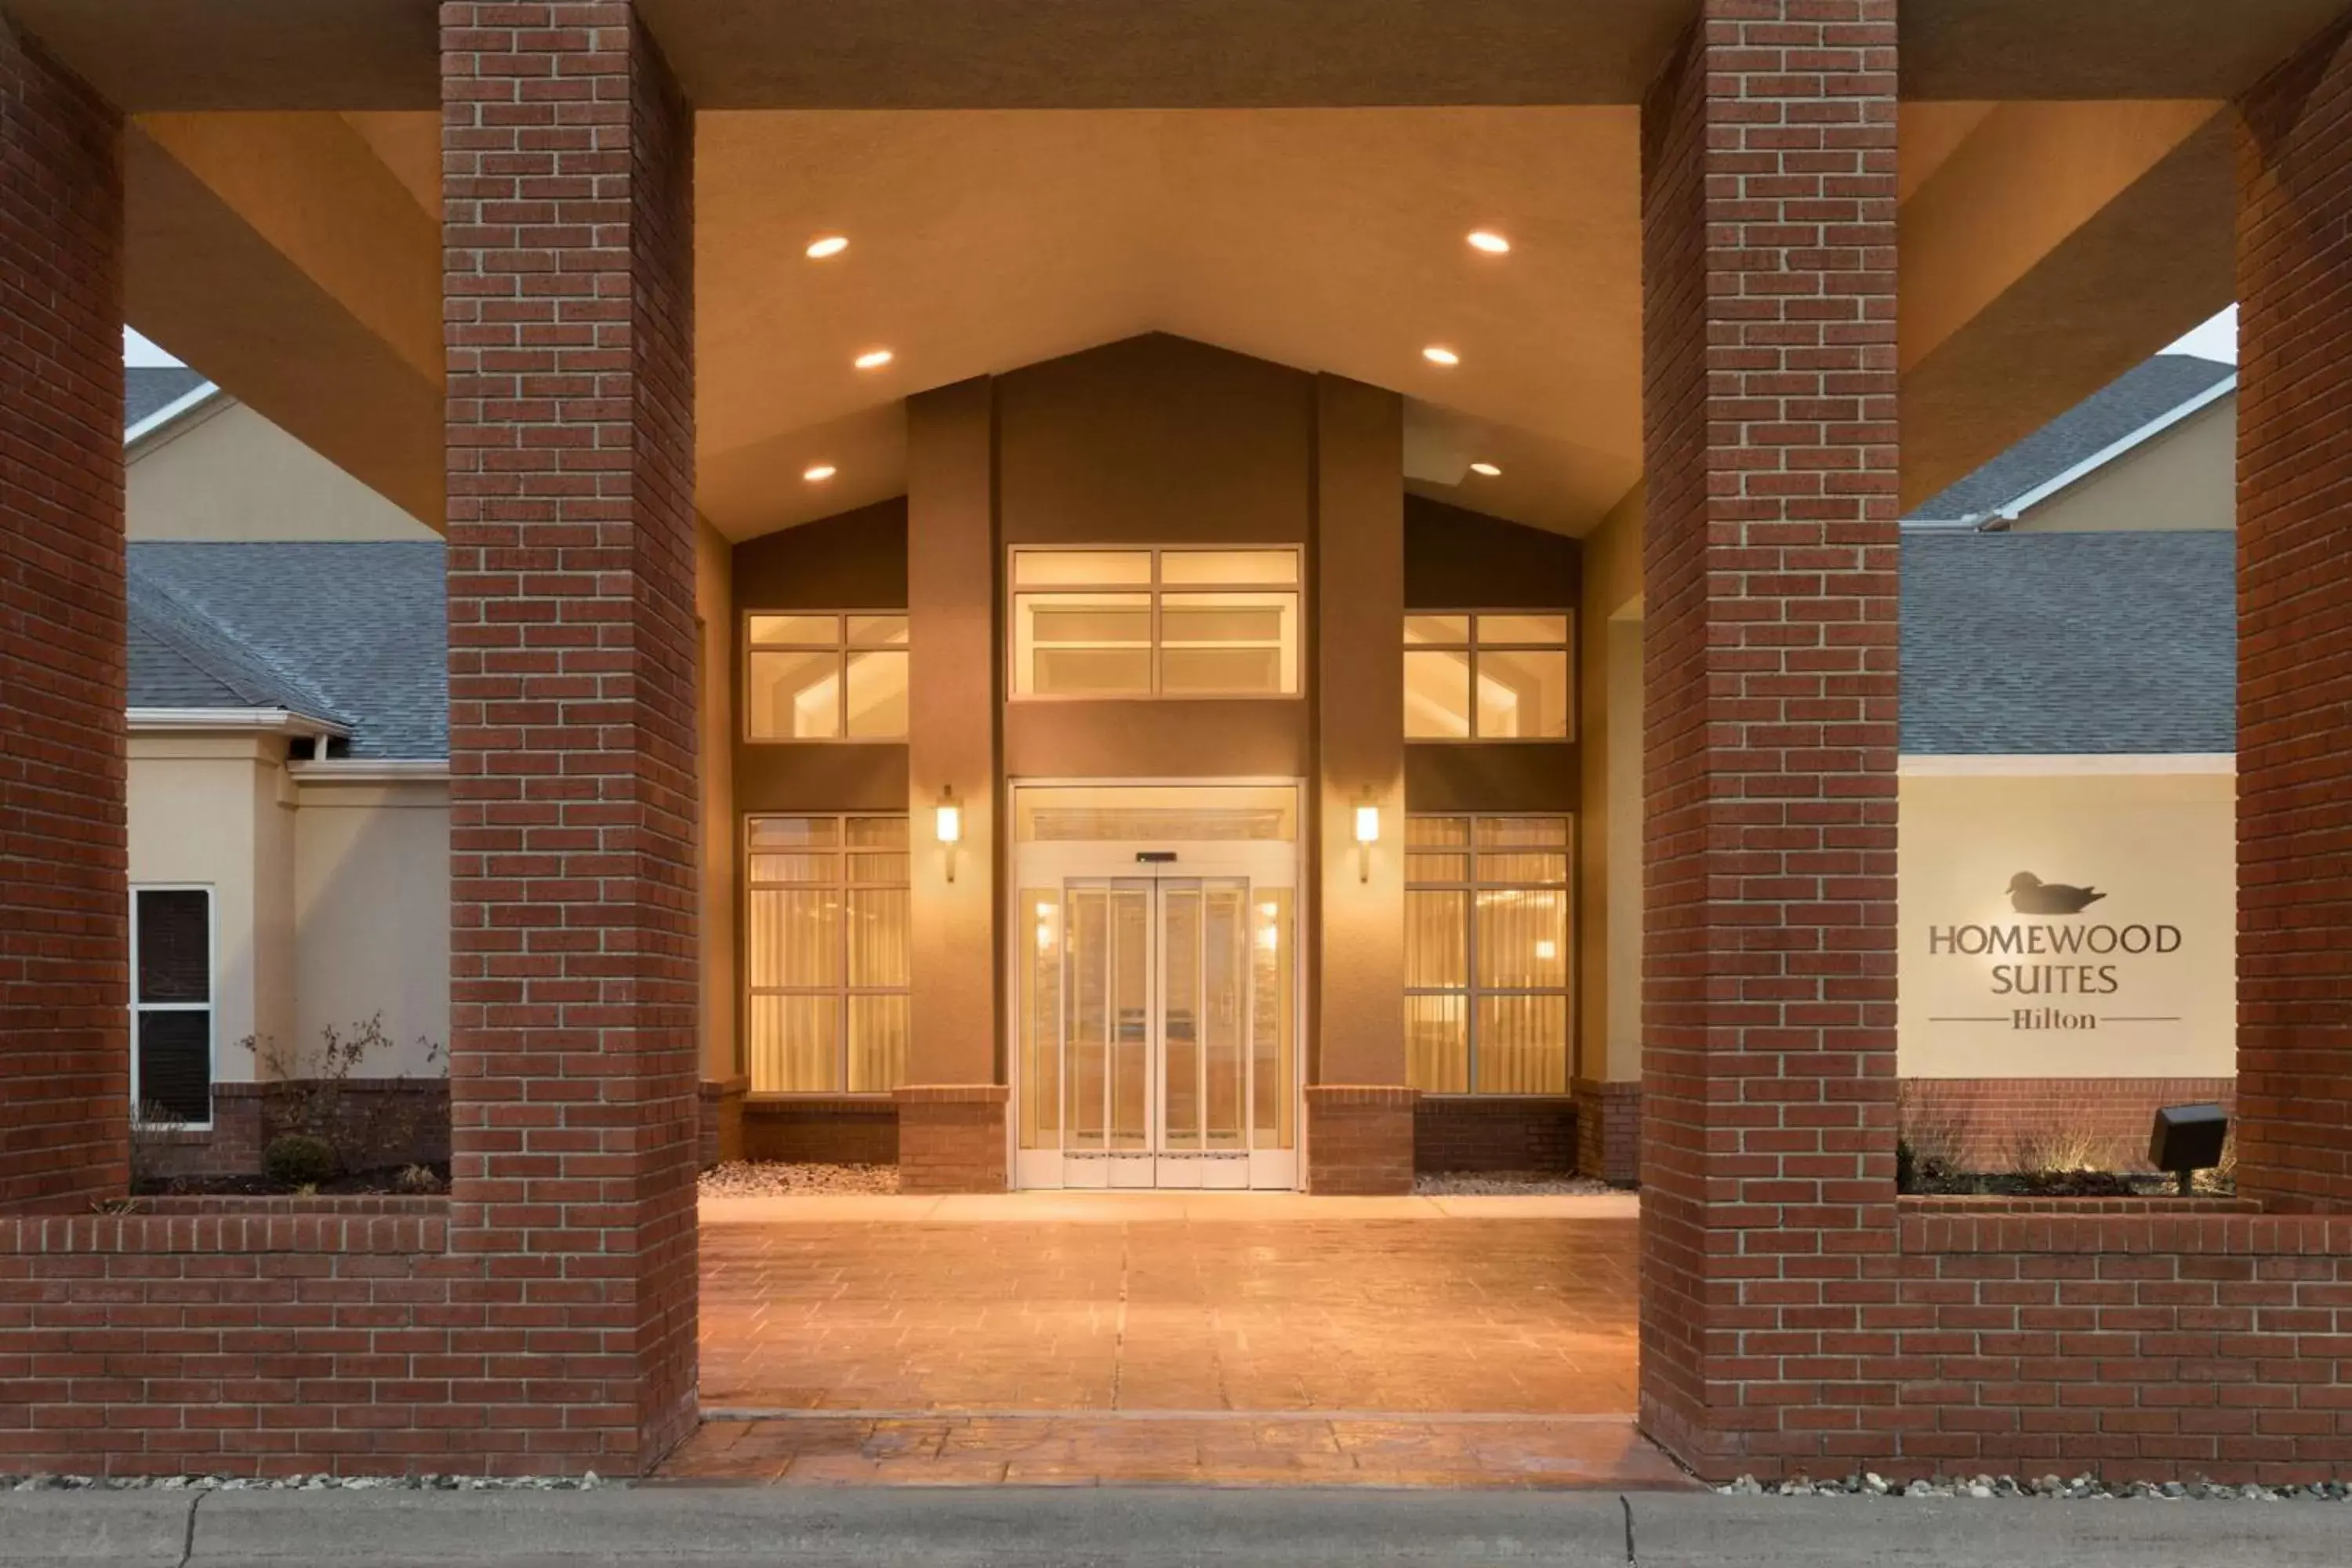 Property building in Homewood Suites by Hilton Toledo-Maumee